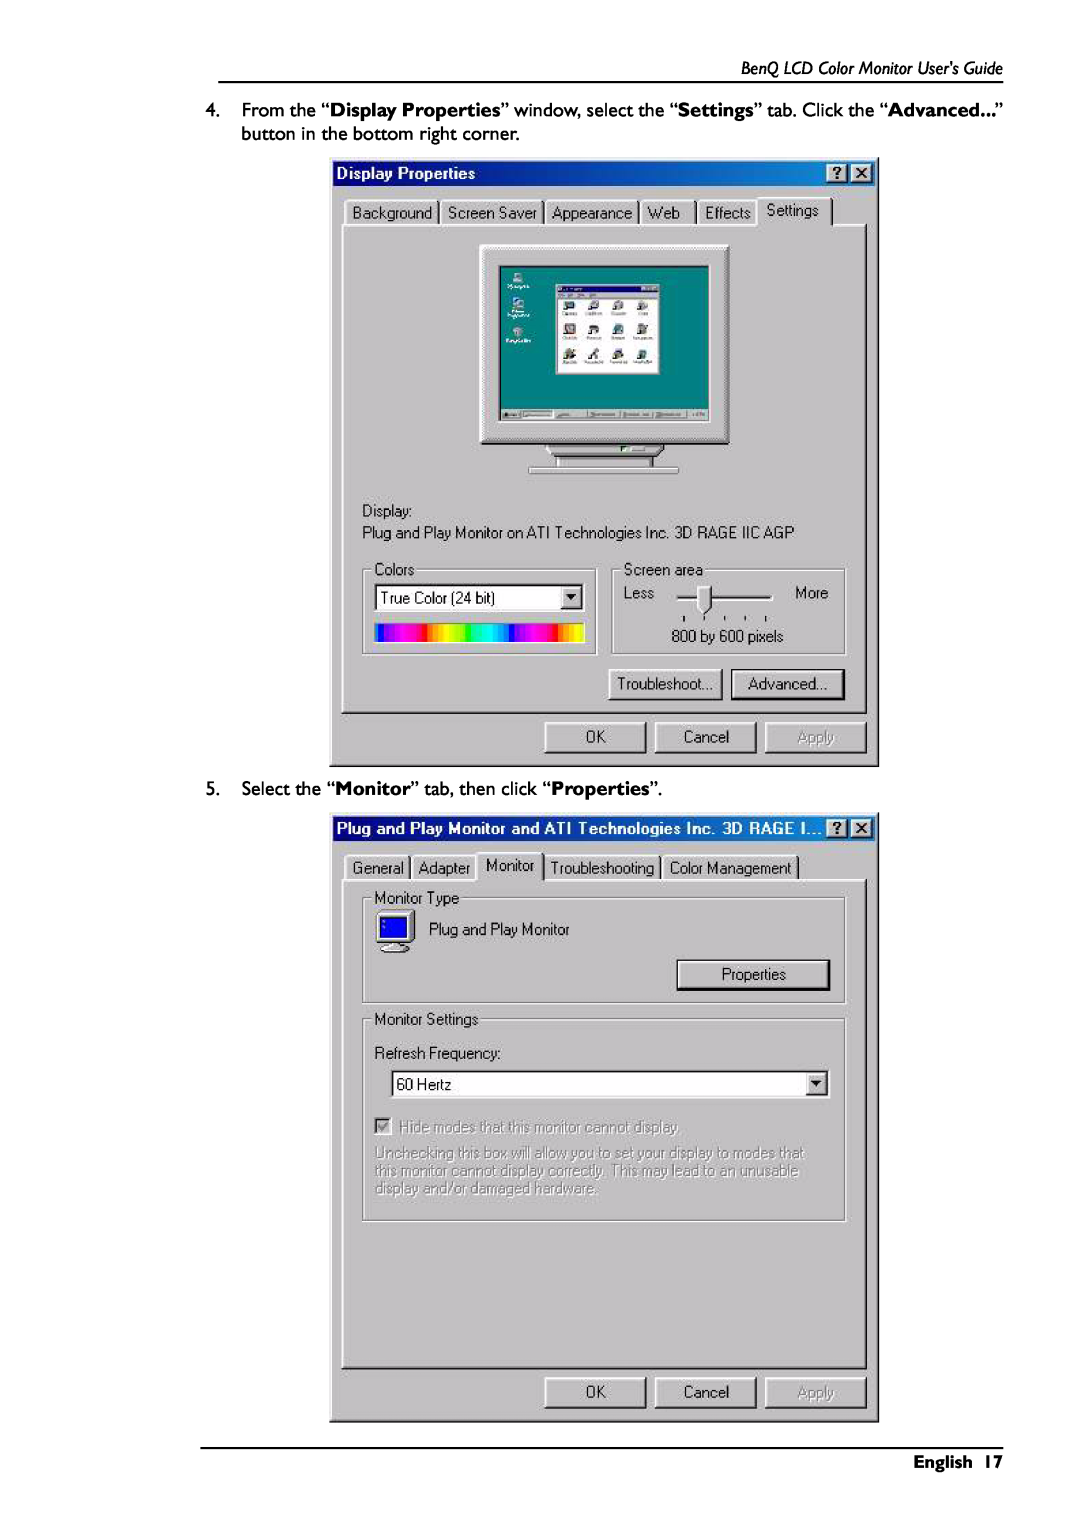 BenQ FP567 user manual Select the “Monitor” tab, then click “Properties”, BenQ LCD Color Monitor Users Guide, English 